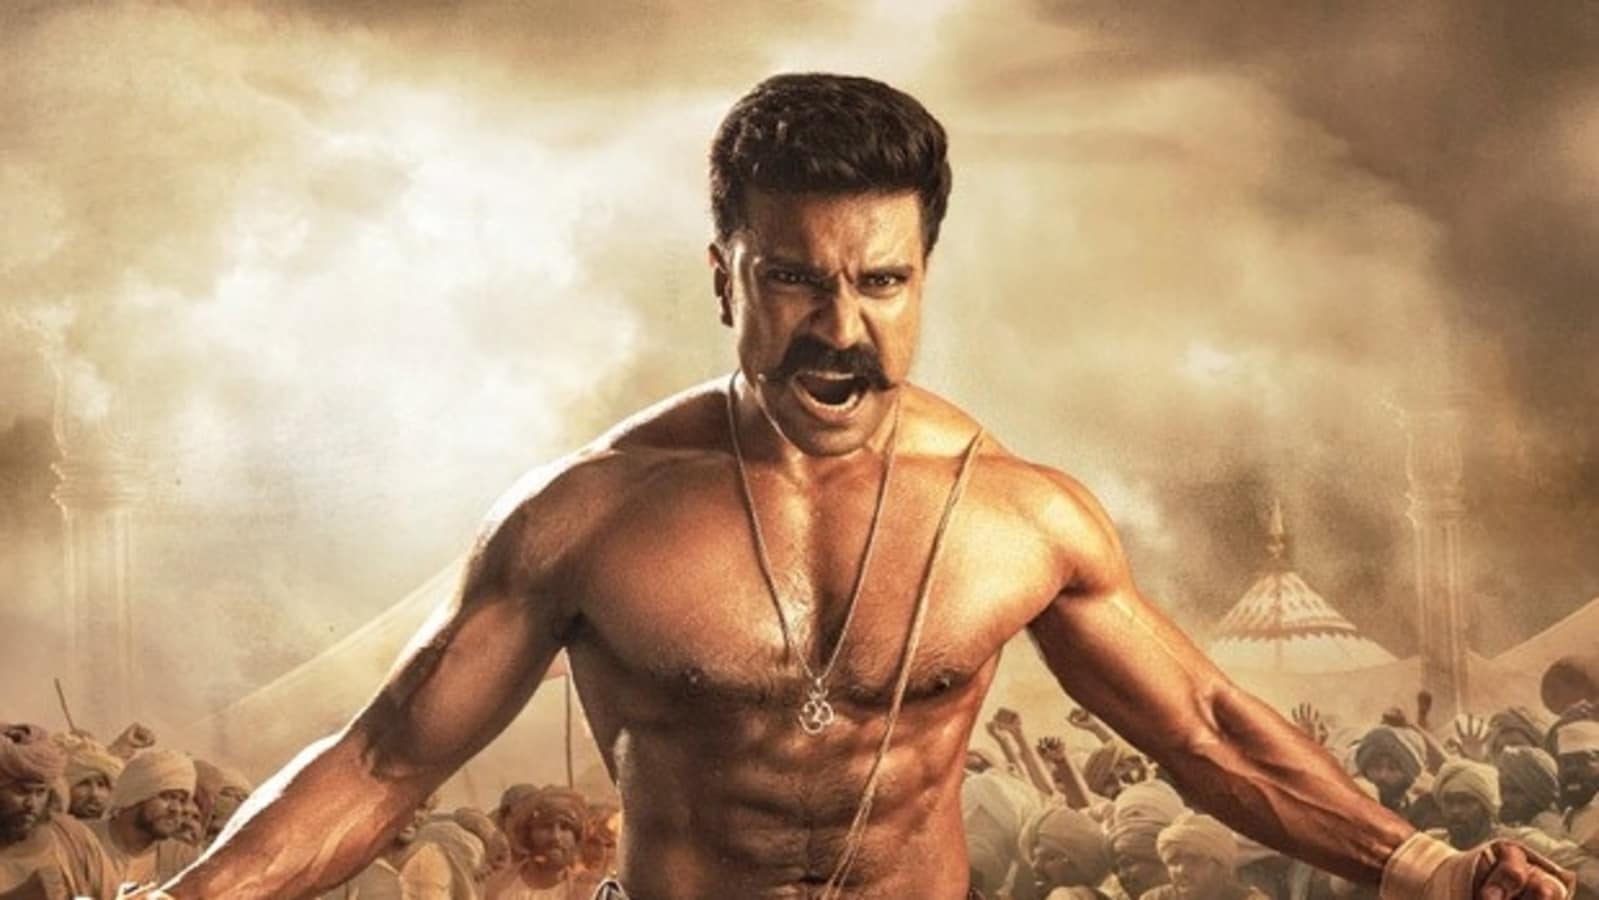 Ram Charan says never expected RRR ‘to be no 1 worldwide’: ‘That was mind-blowing even for SS Rajamouli’